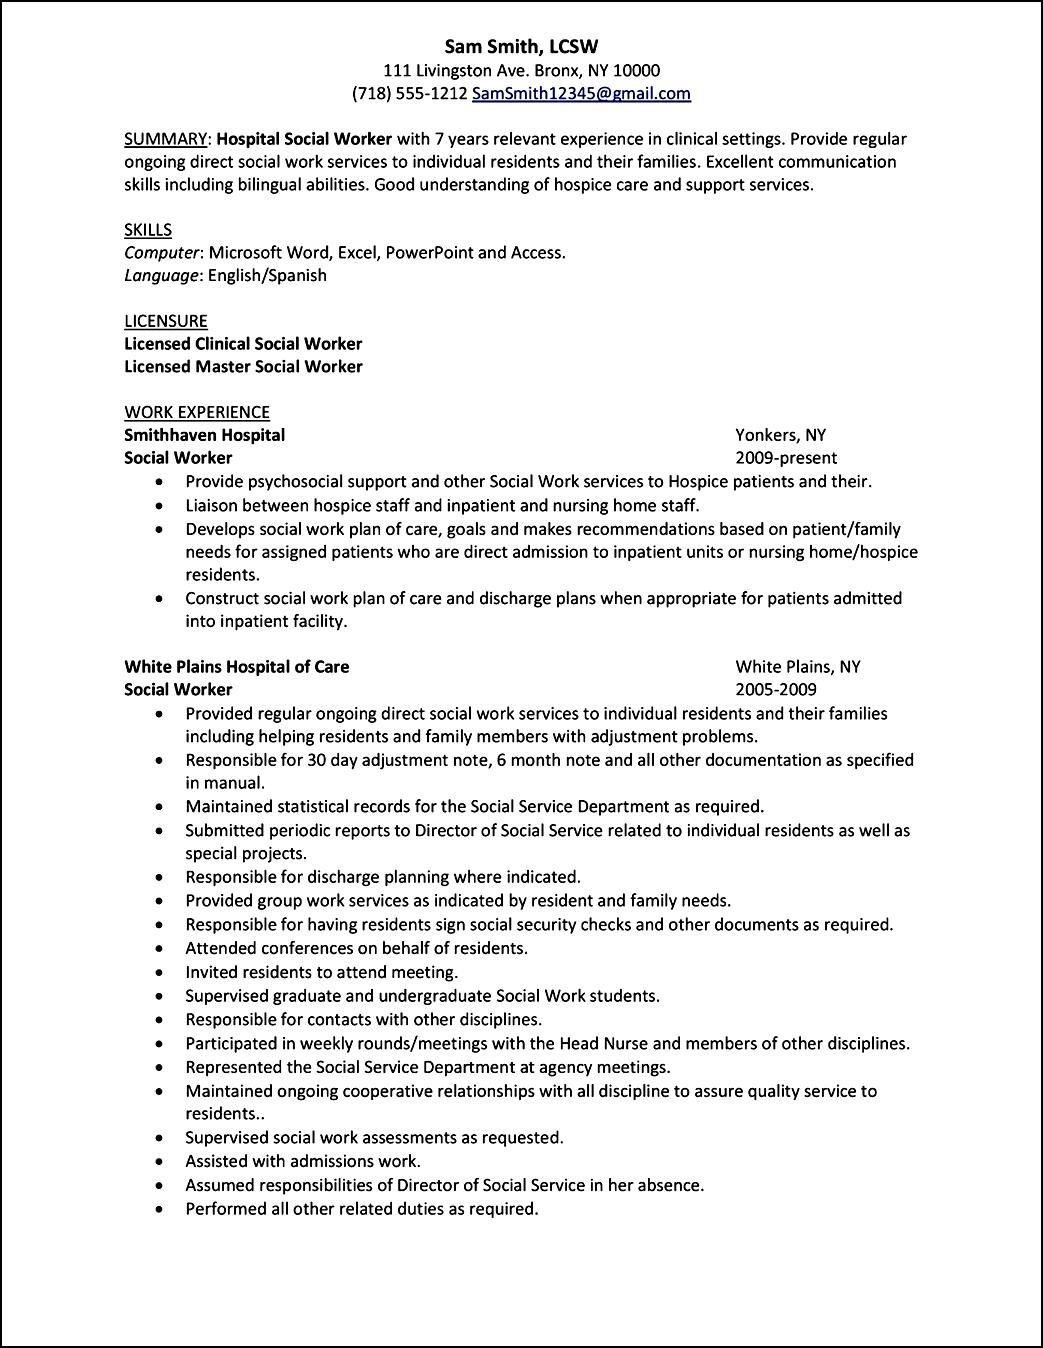 curriculum vitae template for social workers